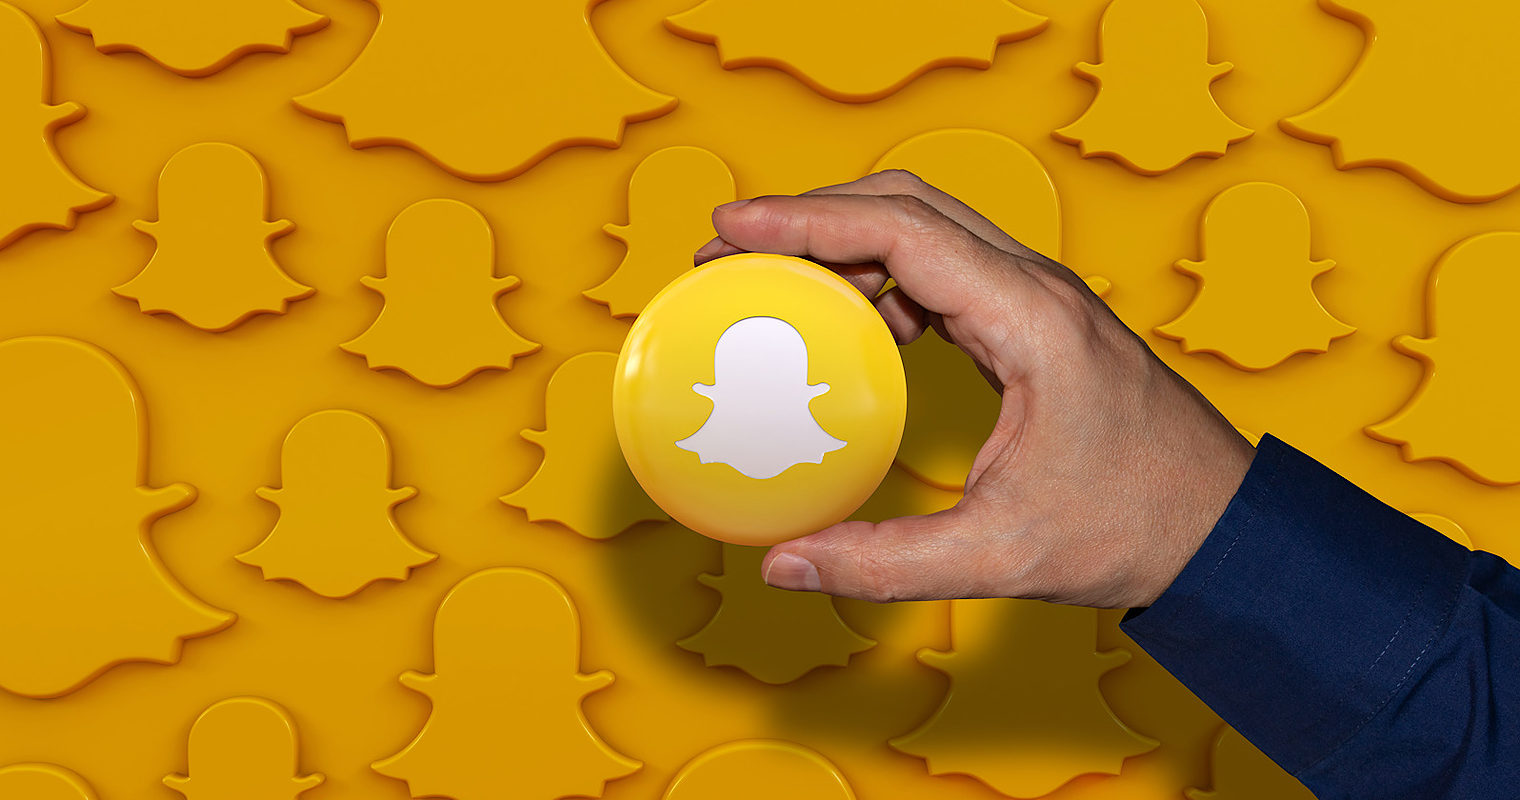 Snapchat Reports Increase in Mobile Video Viewing